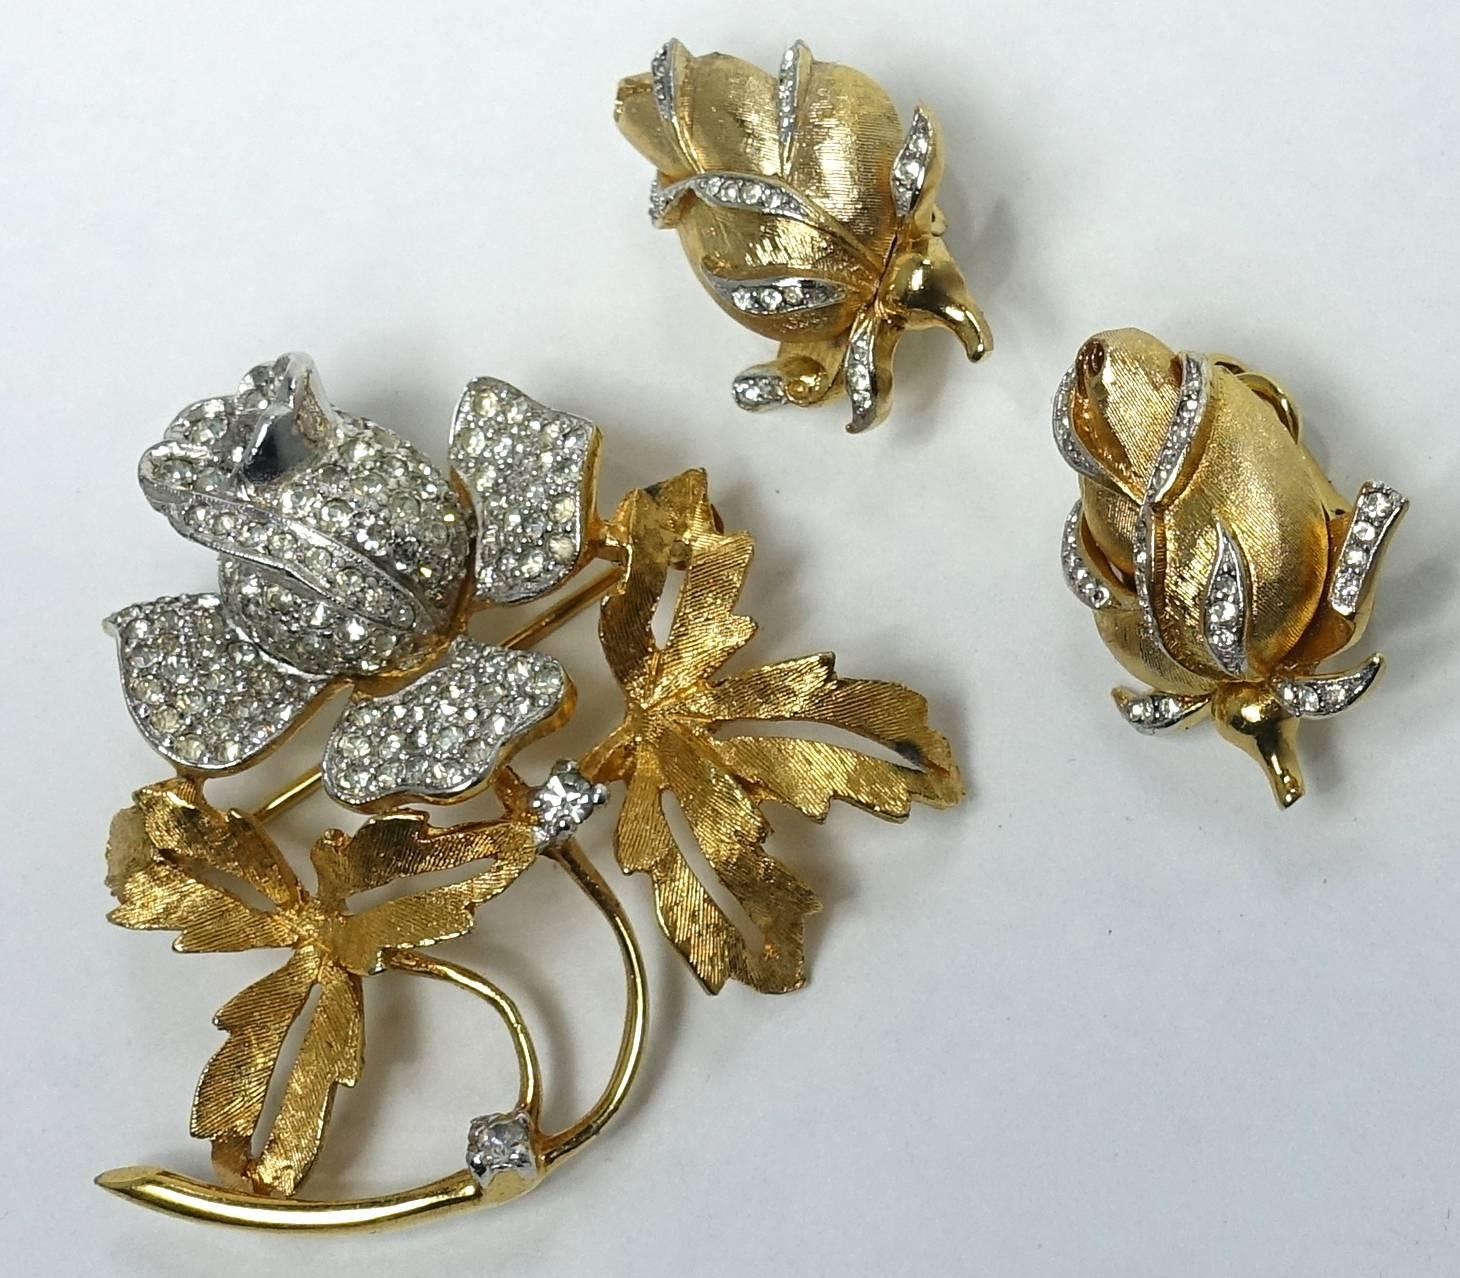 This vintage 1960s Trifari set features a floral brooch with clear rhinestones creating the flower to be 3-dimensional.  The leaves have a gold tone Florentine finish.  The brooch measures 1-1/2” x 1-3/4”.  The matching clip earrings have the flower